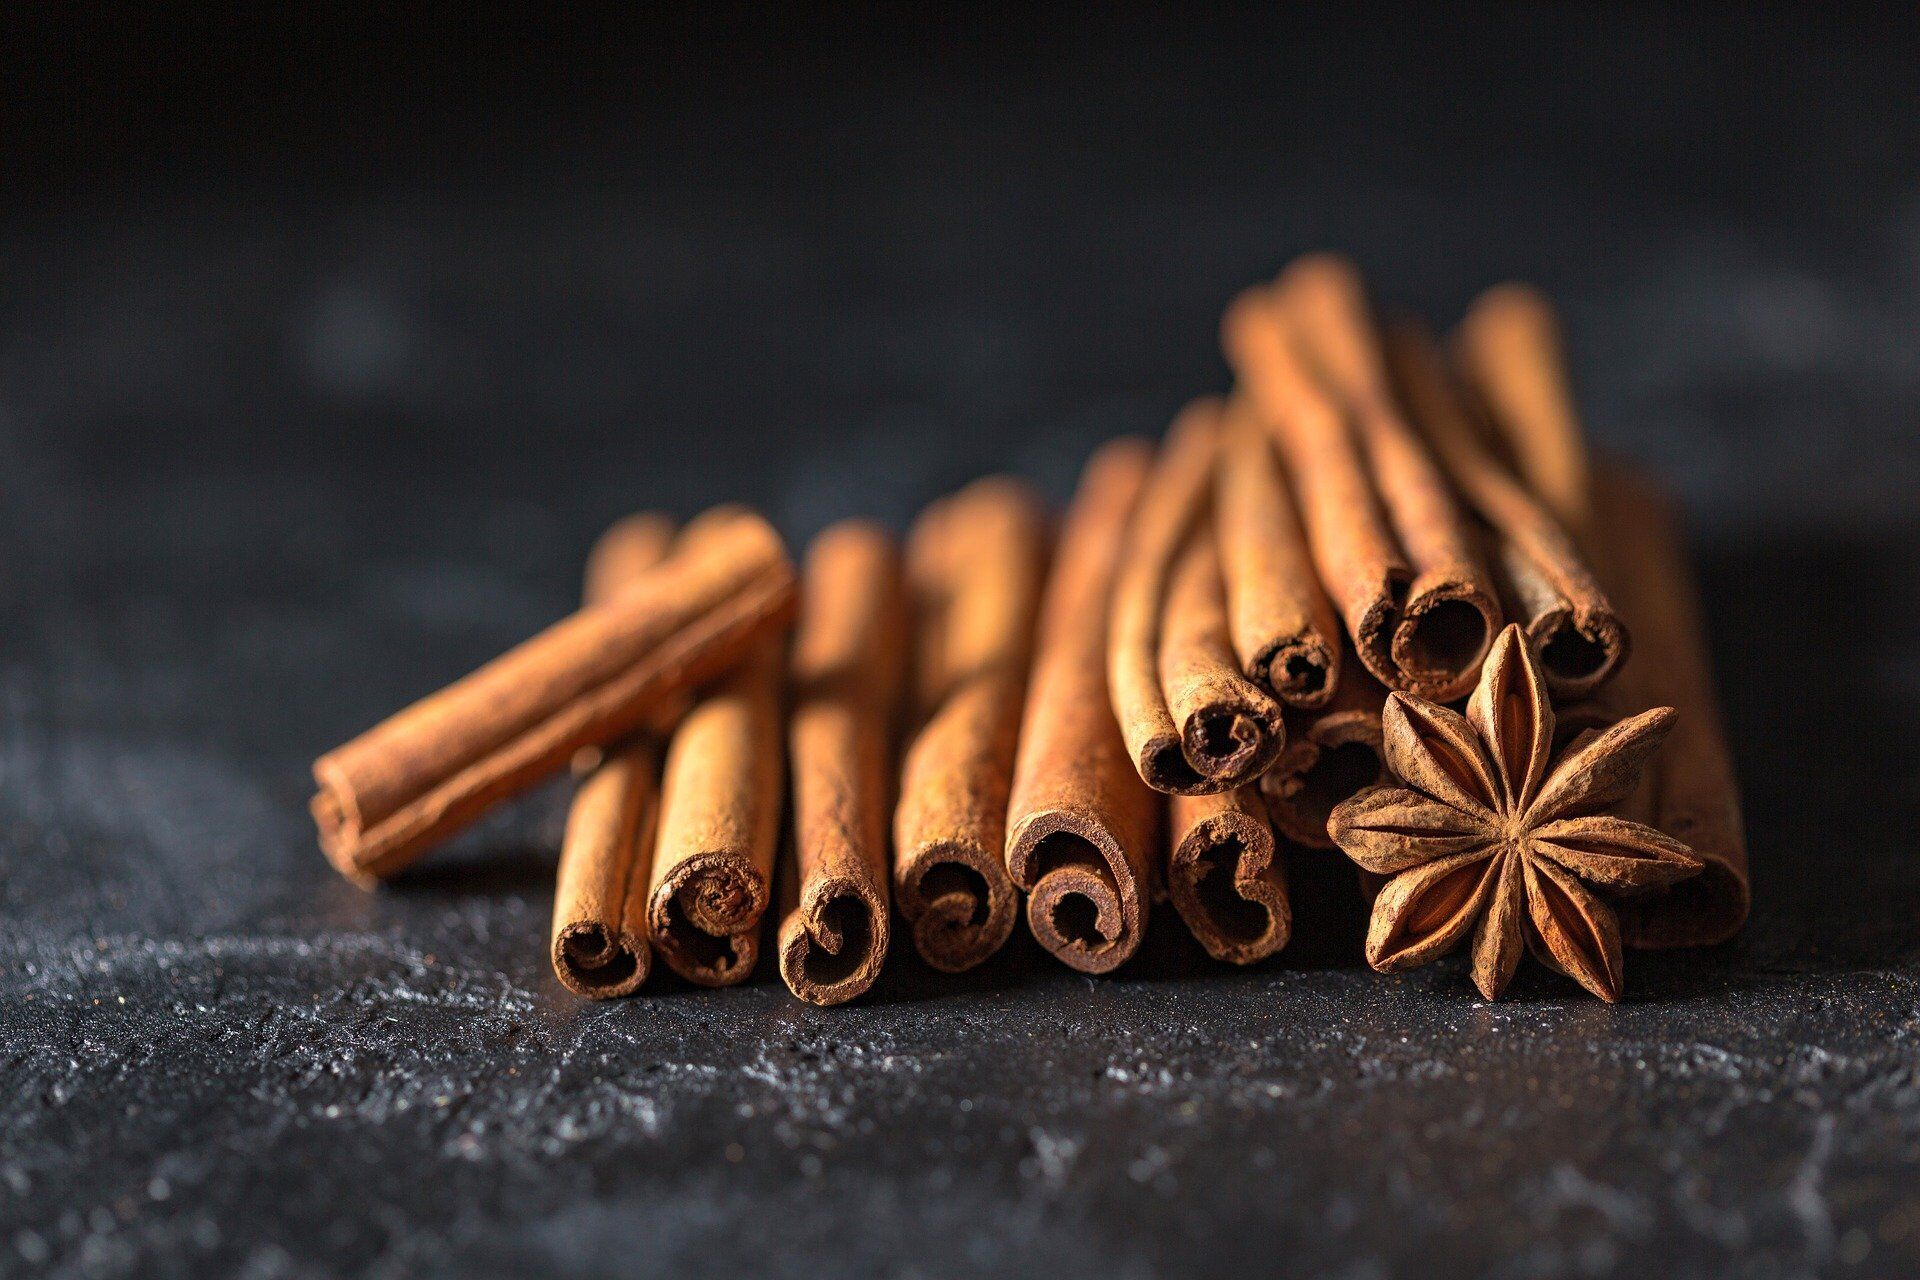 Cinnamon must be added to coffee